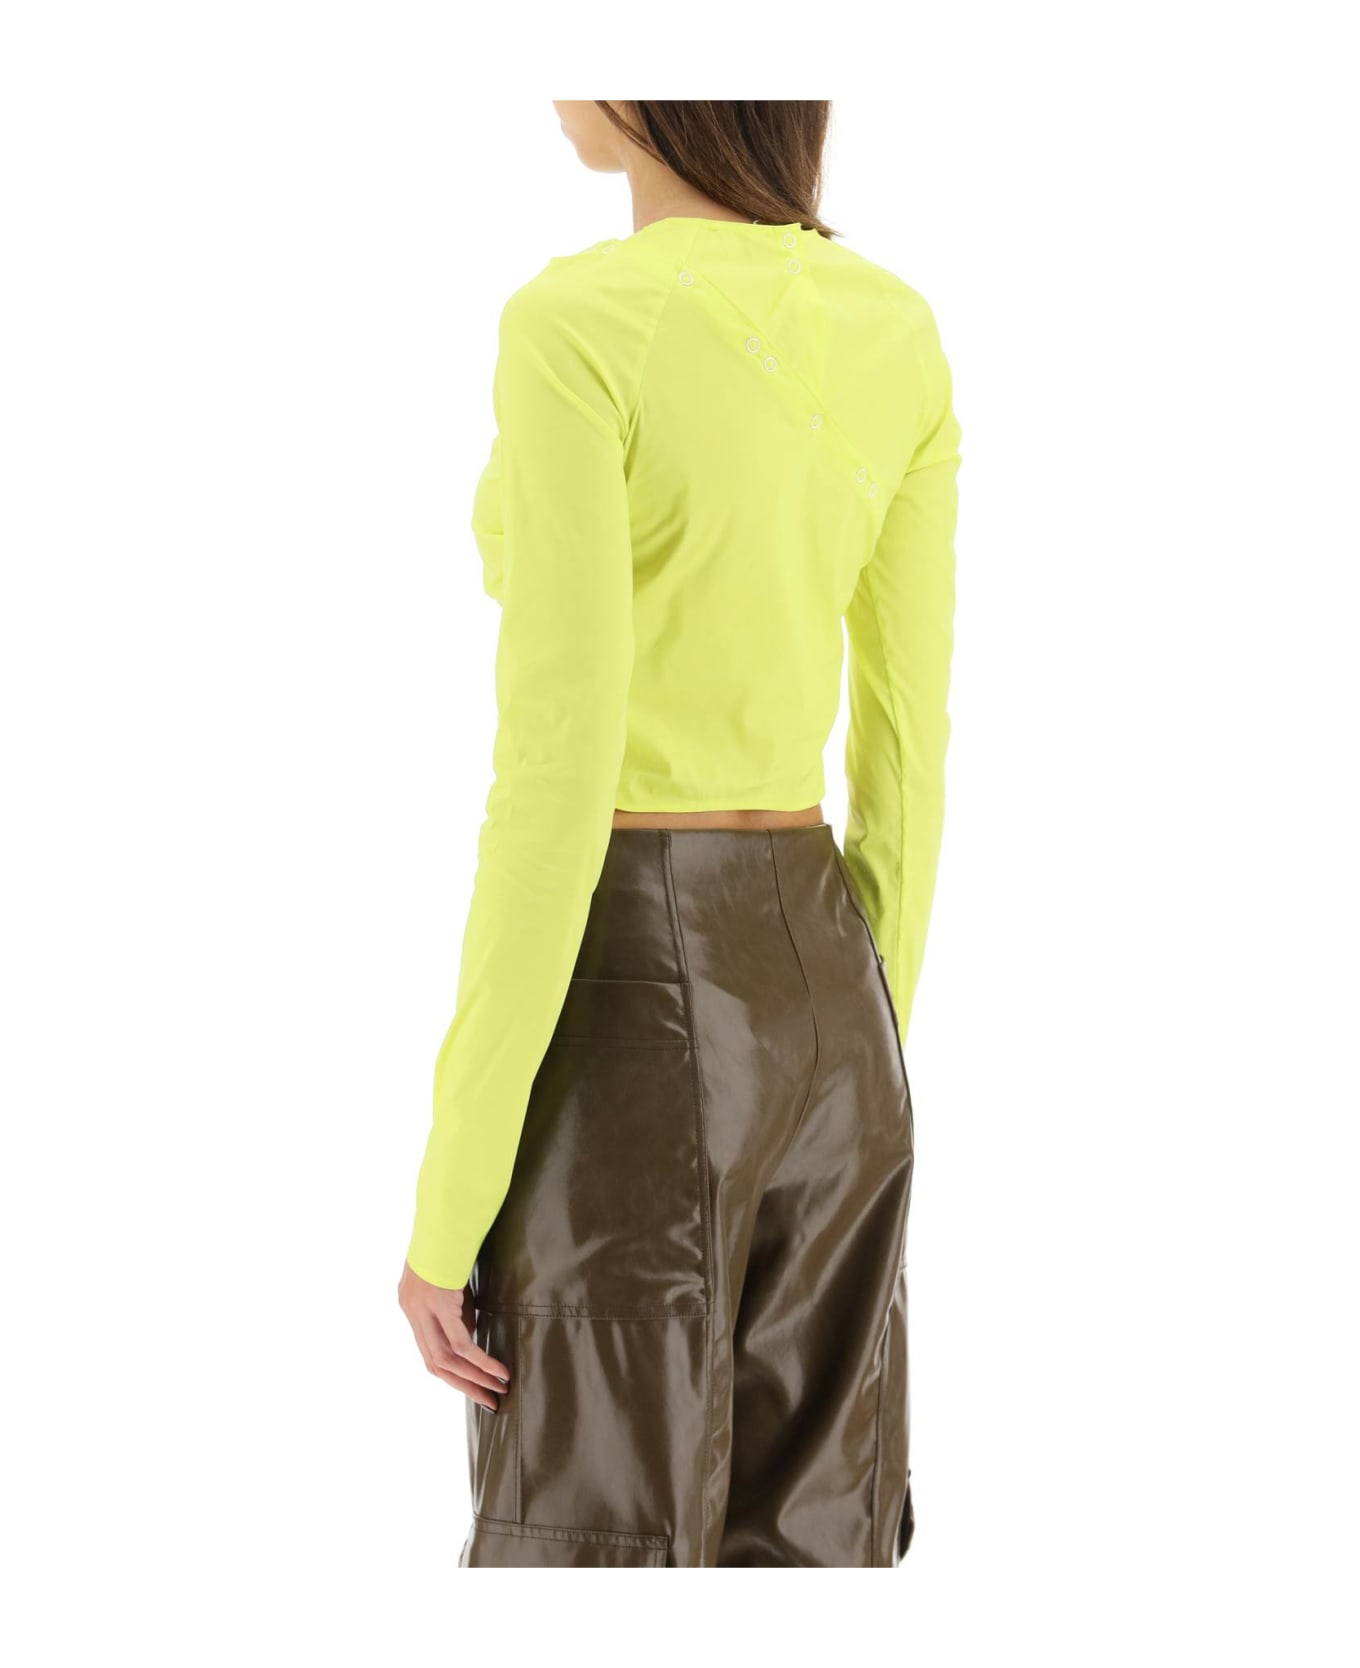 Ganni Convertible Cropped Top In Stretch Poplin - SULPHUR SPRING (Yellow)